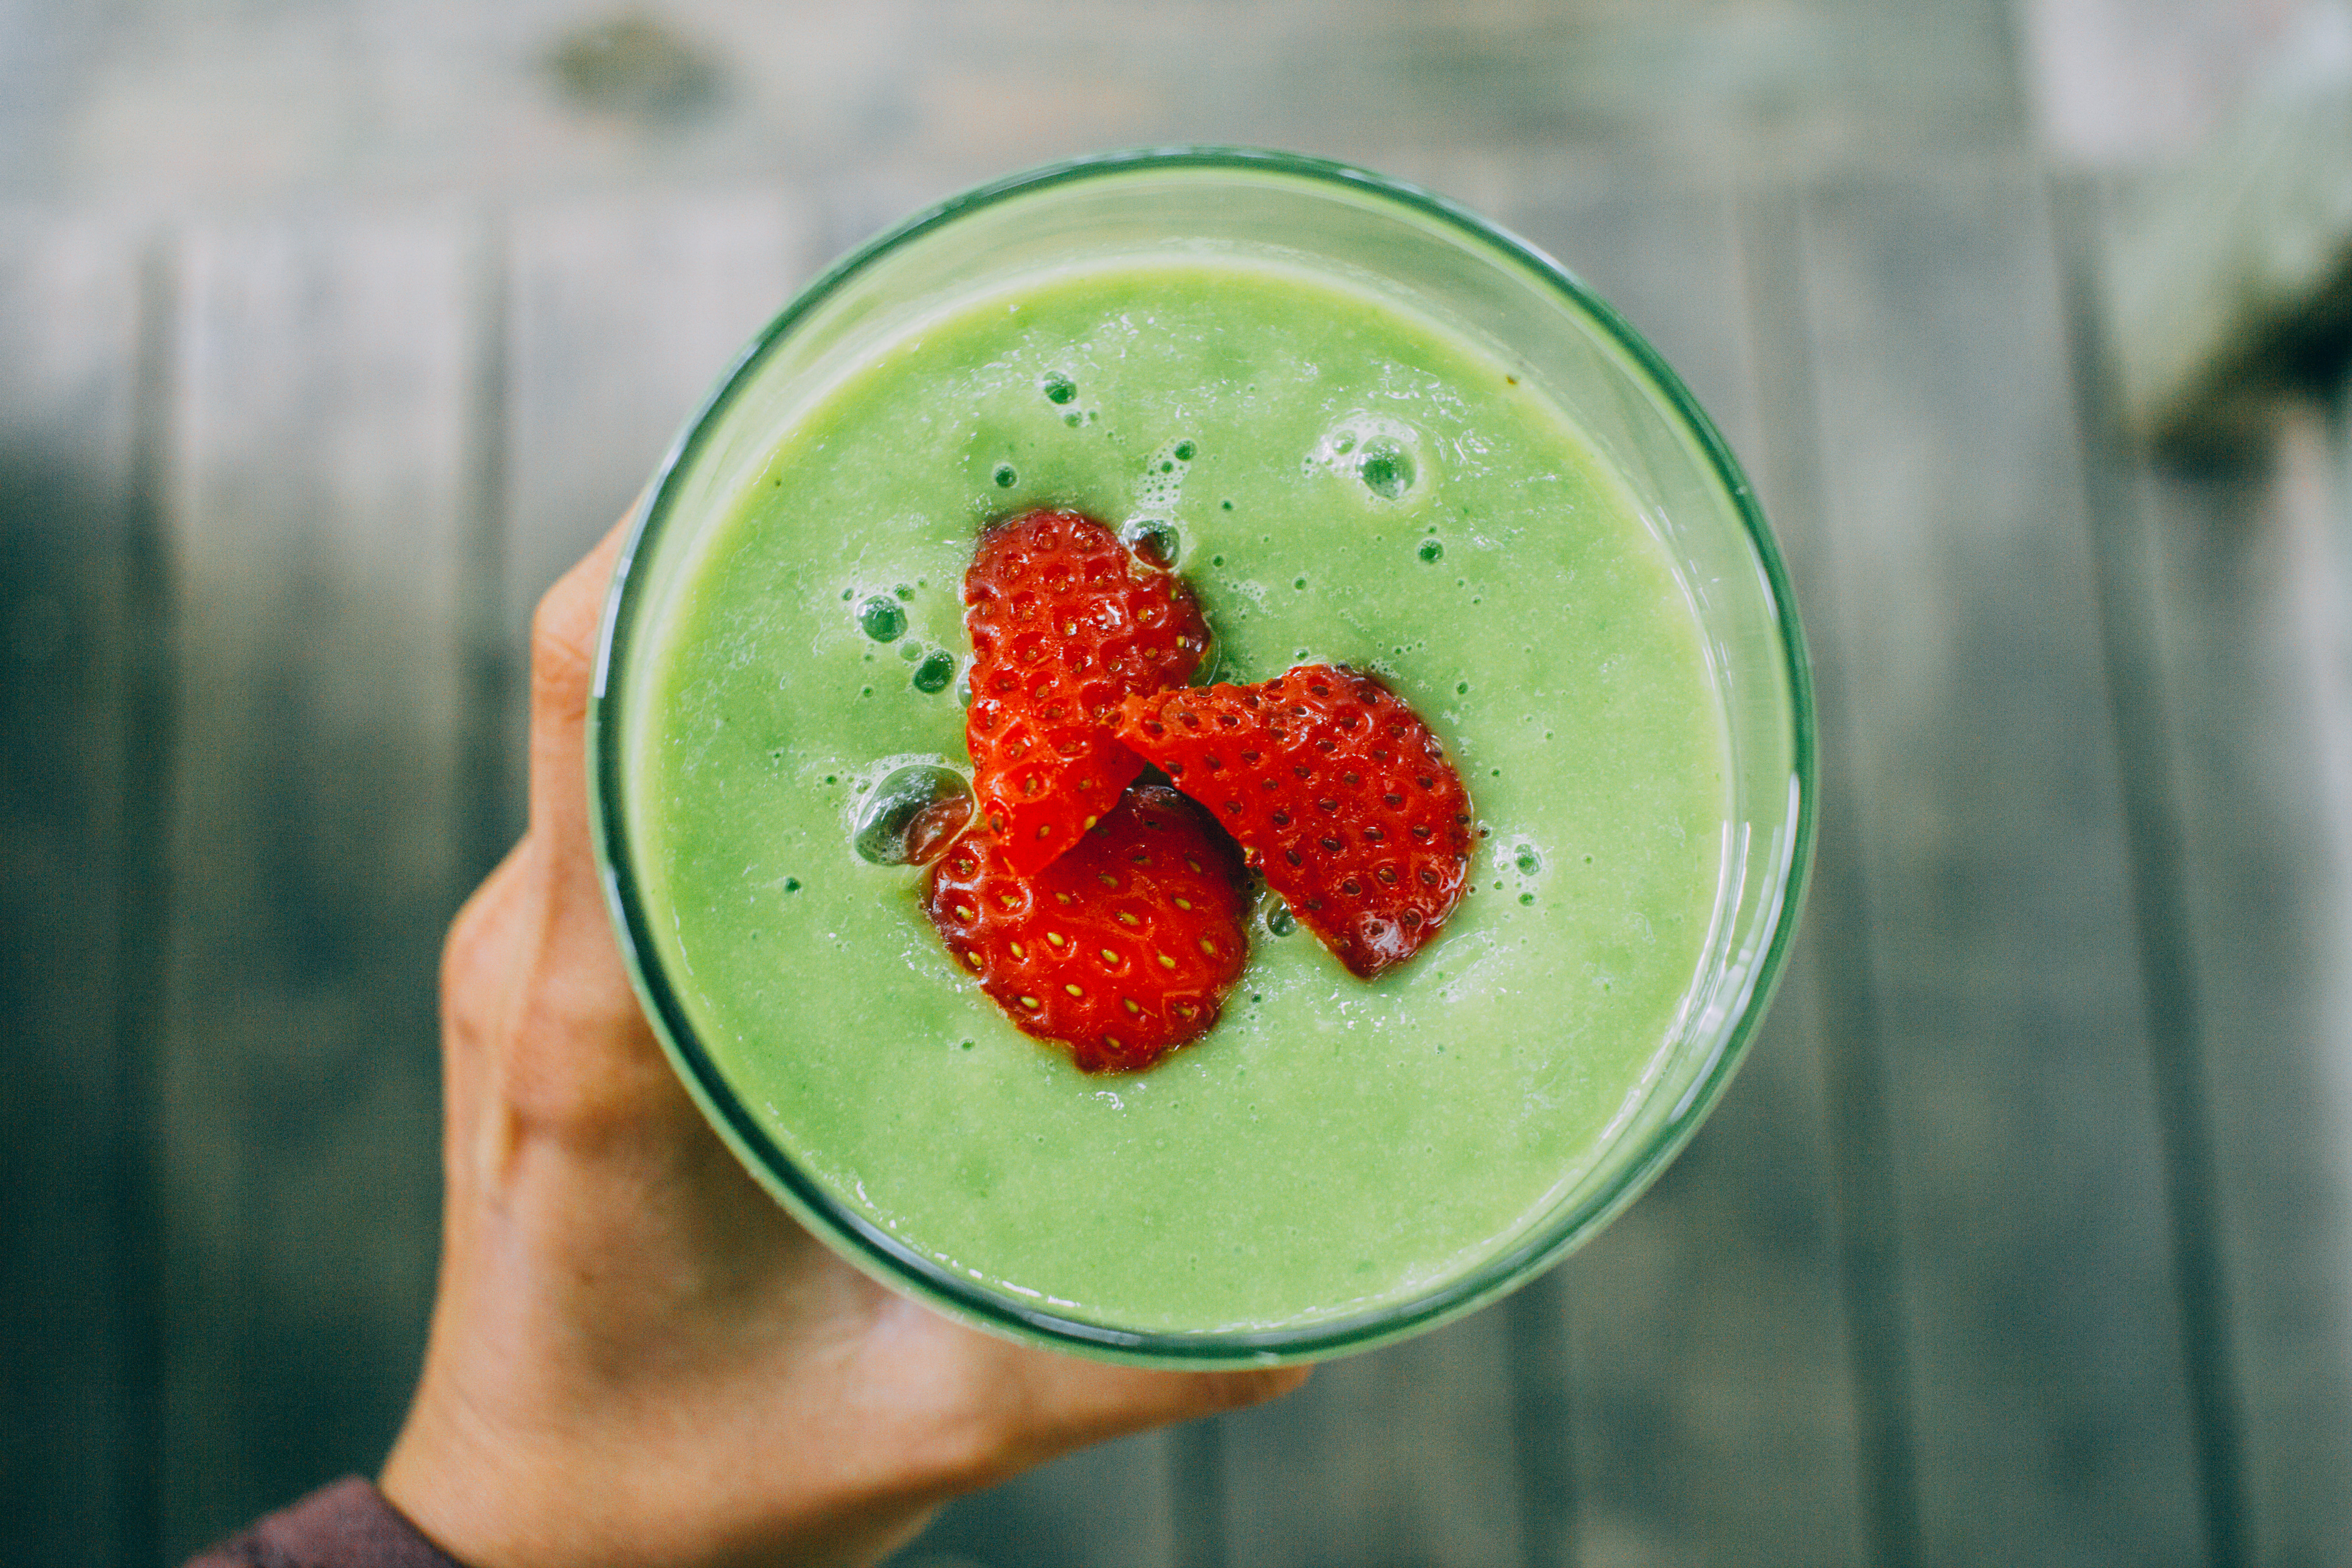 The magical formula to the most delicious green smoothie ever, that even picky kids and skeptical adult will love + fun 30 day challenge. Via @bcnutritionista